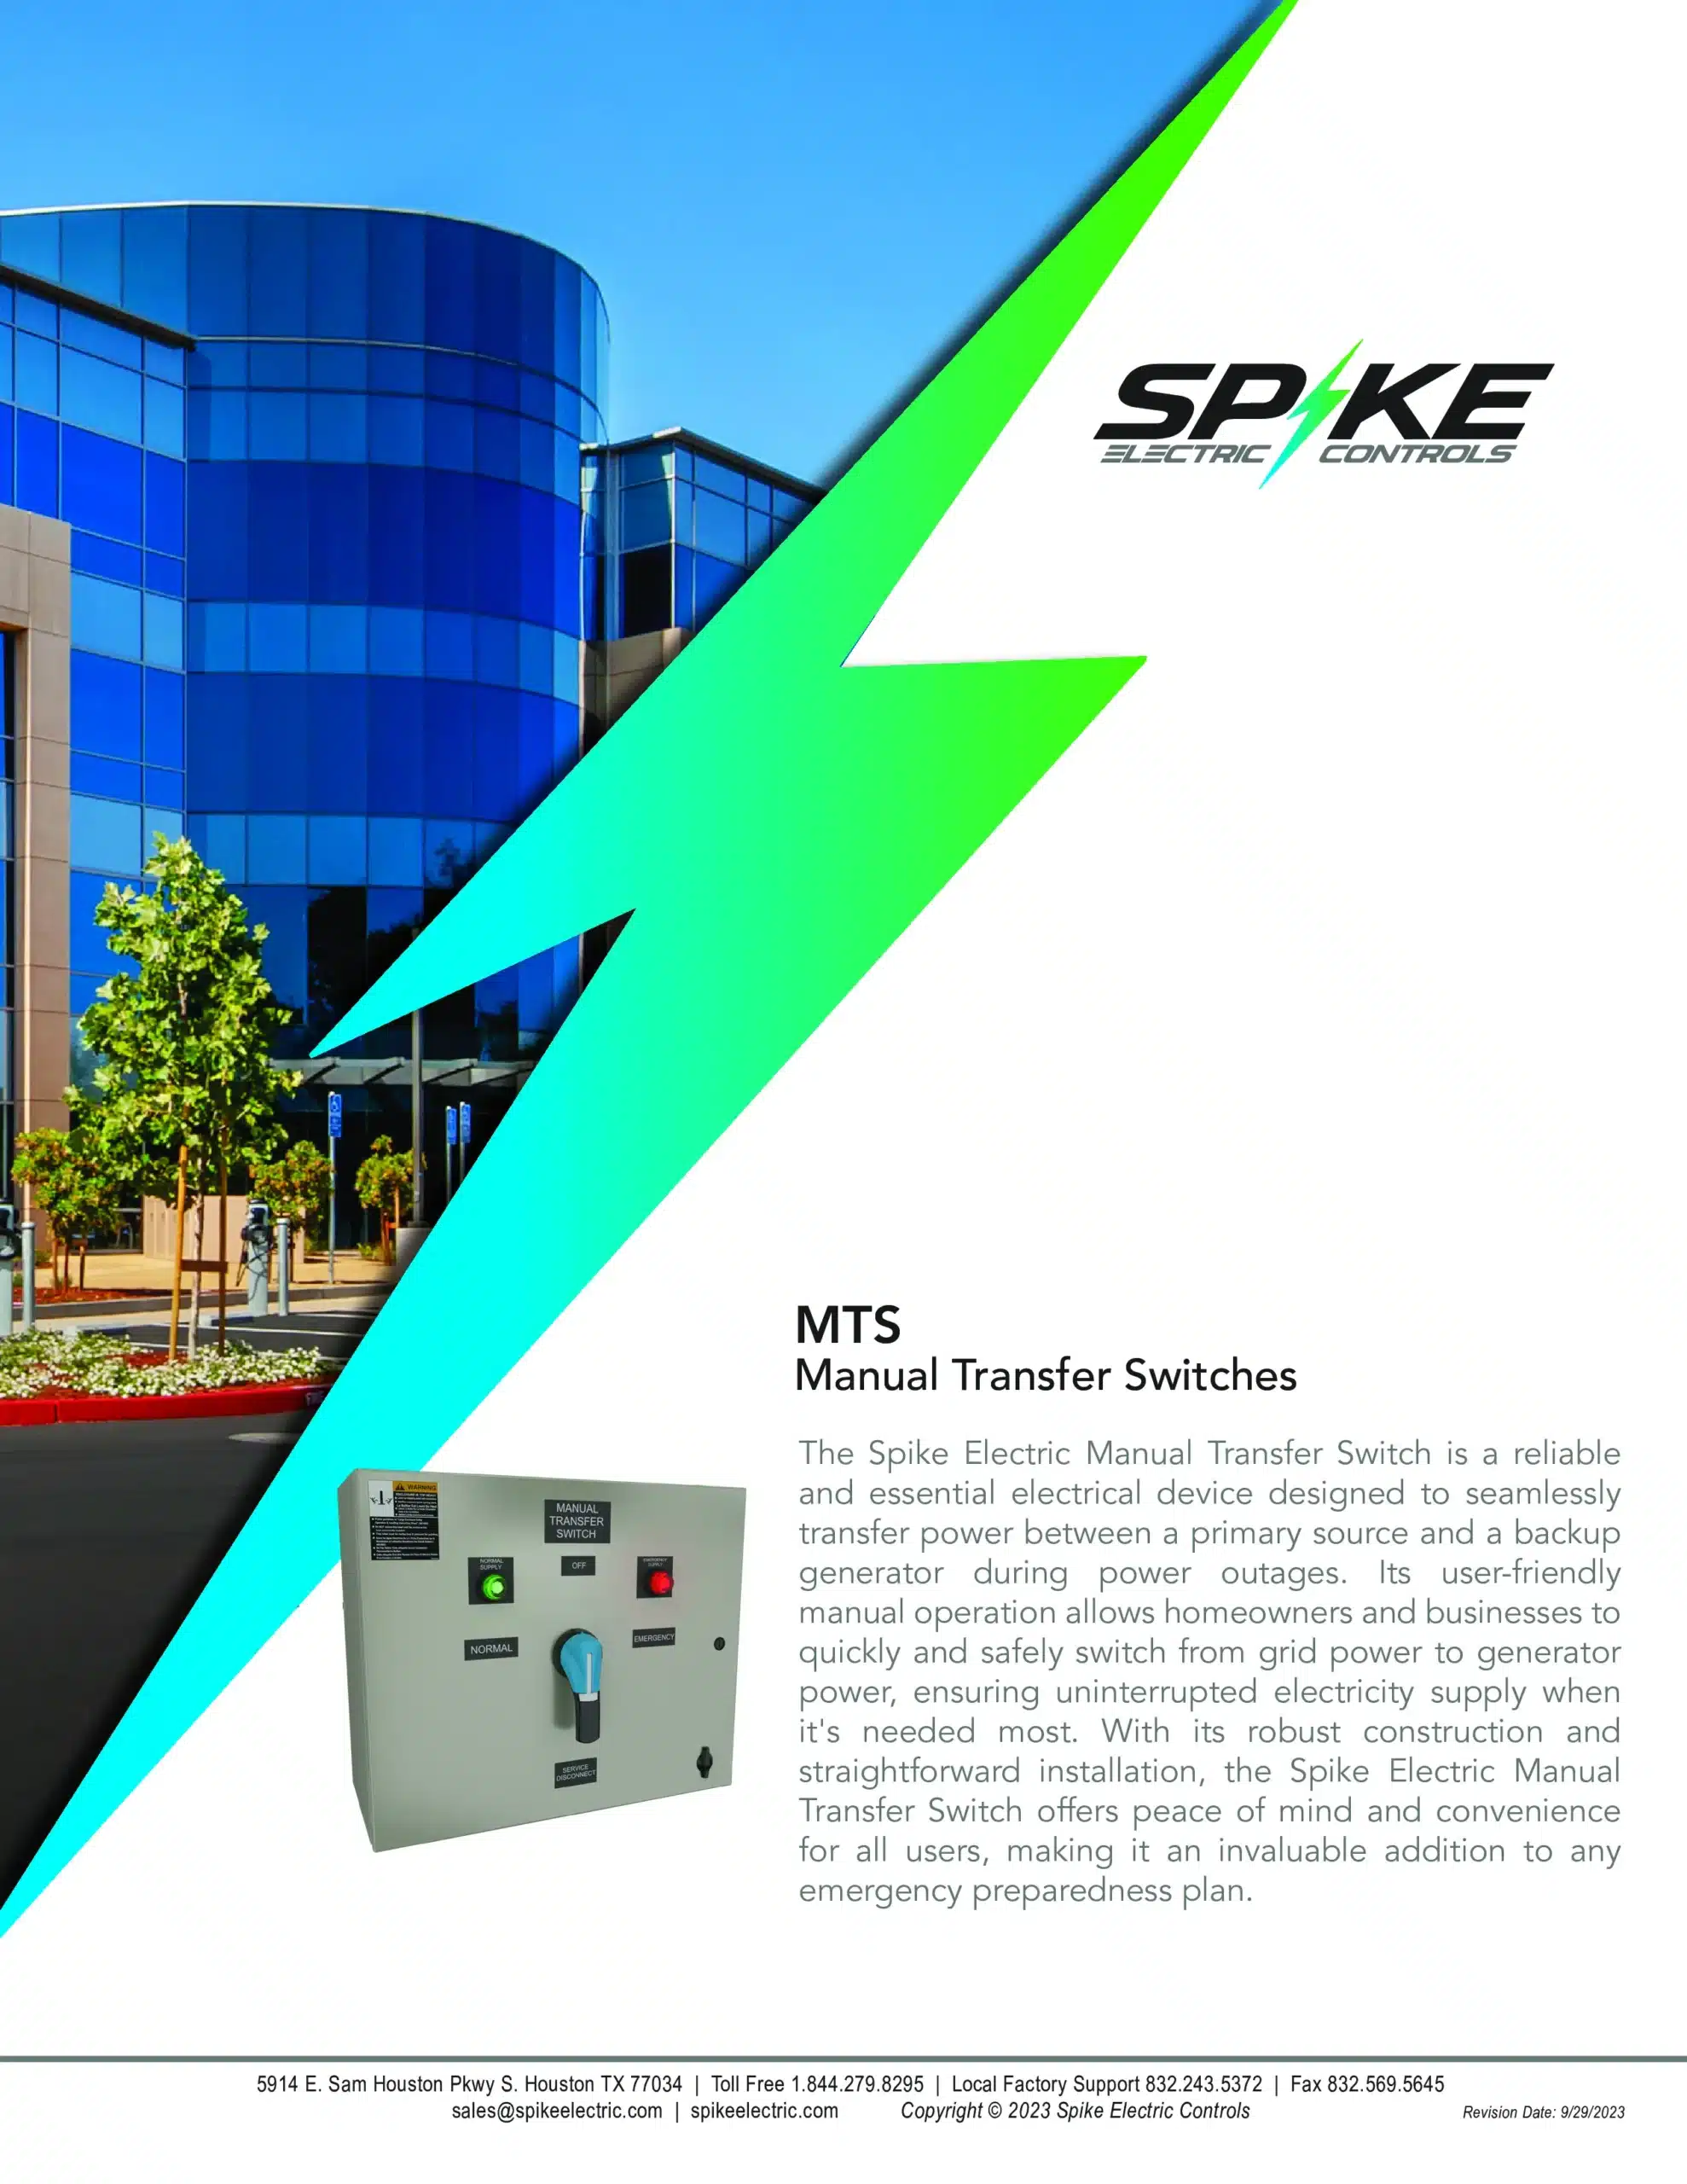 Manual Transfer Switch Manual Cover by Spike Electric